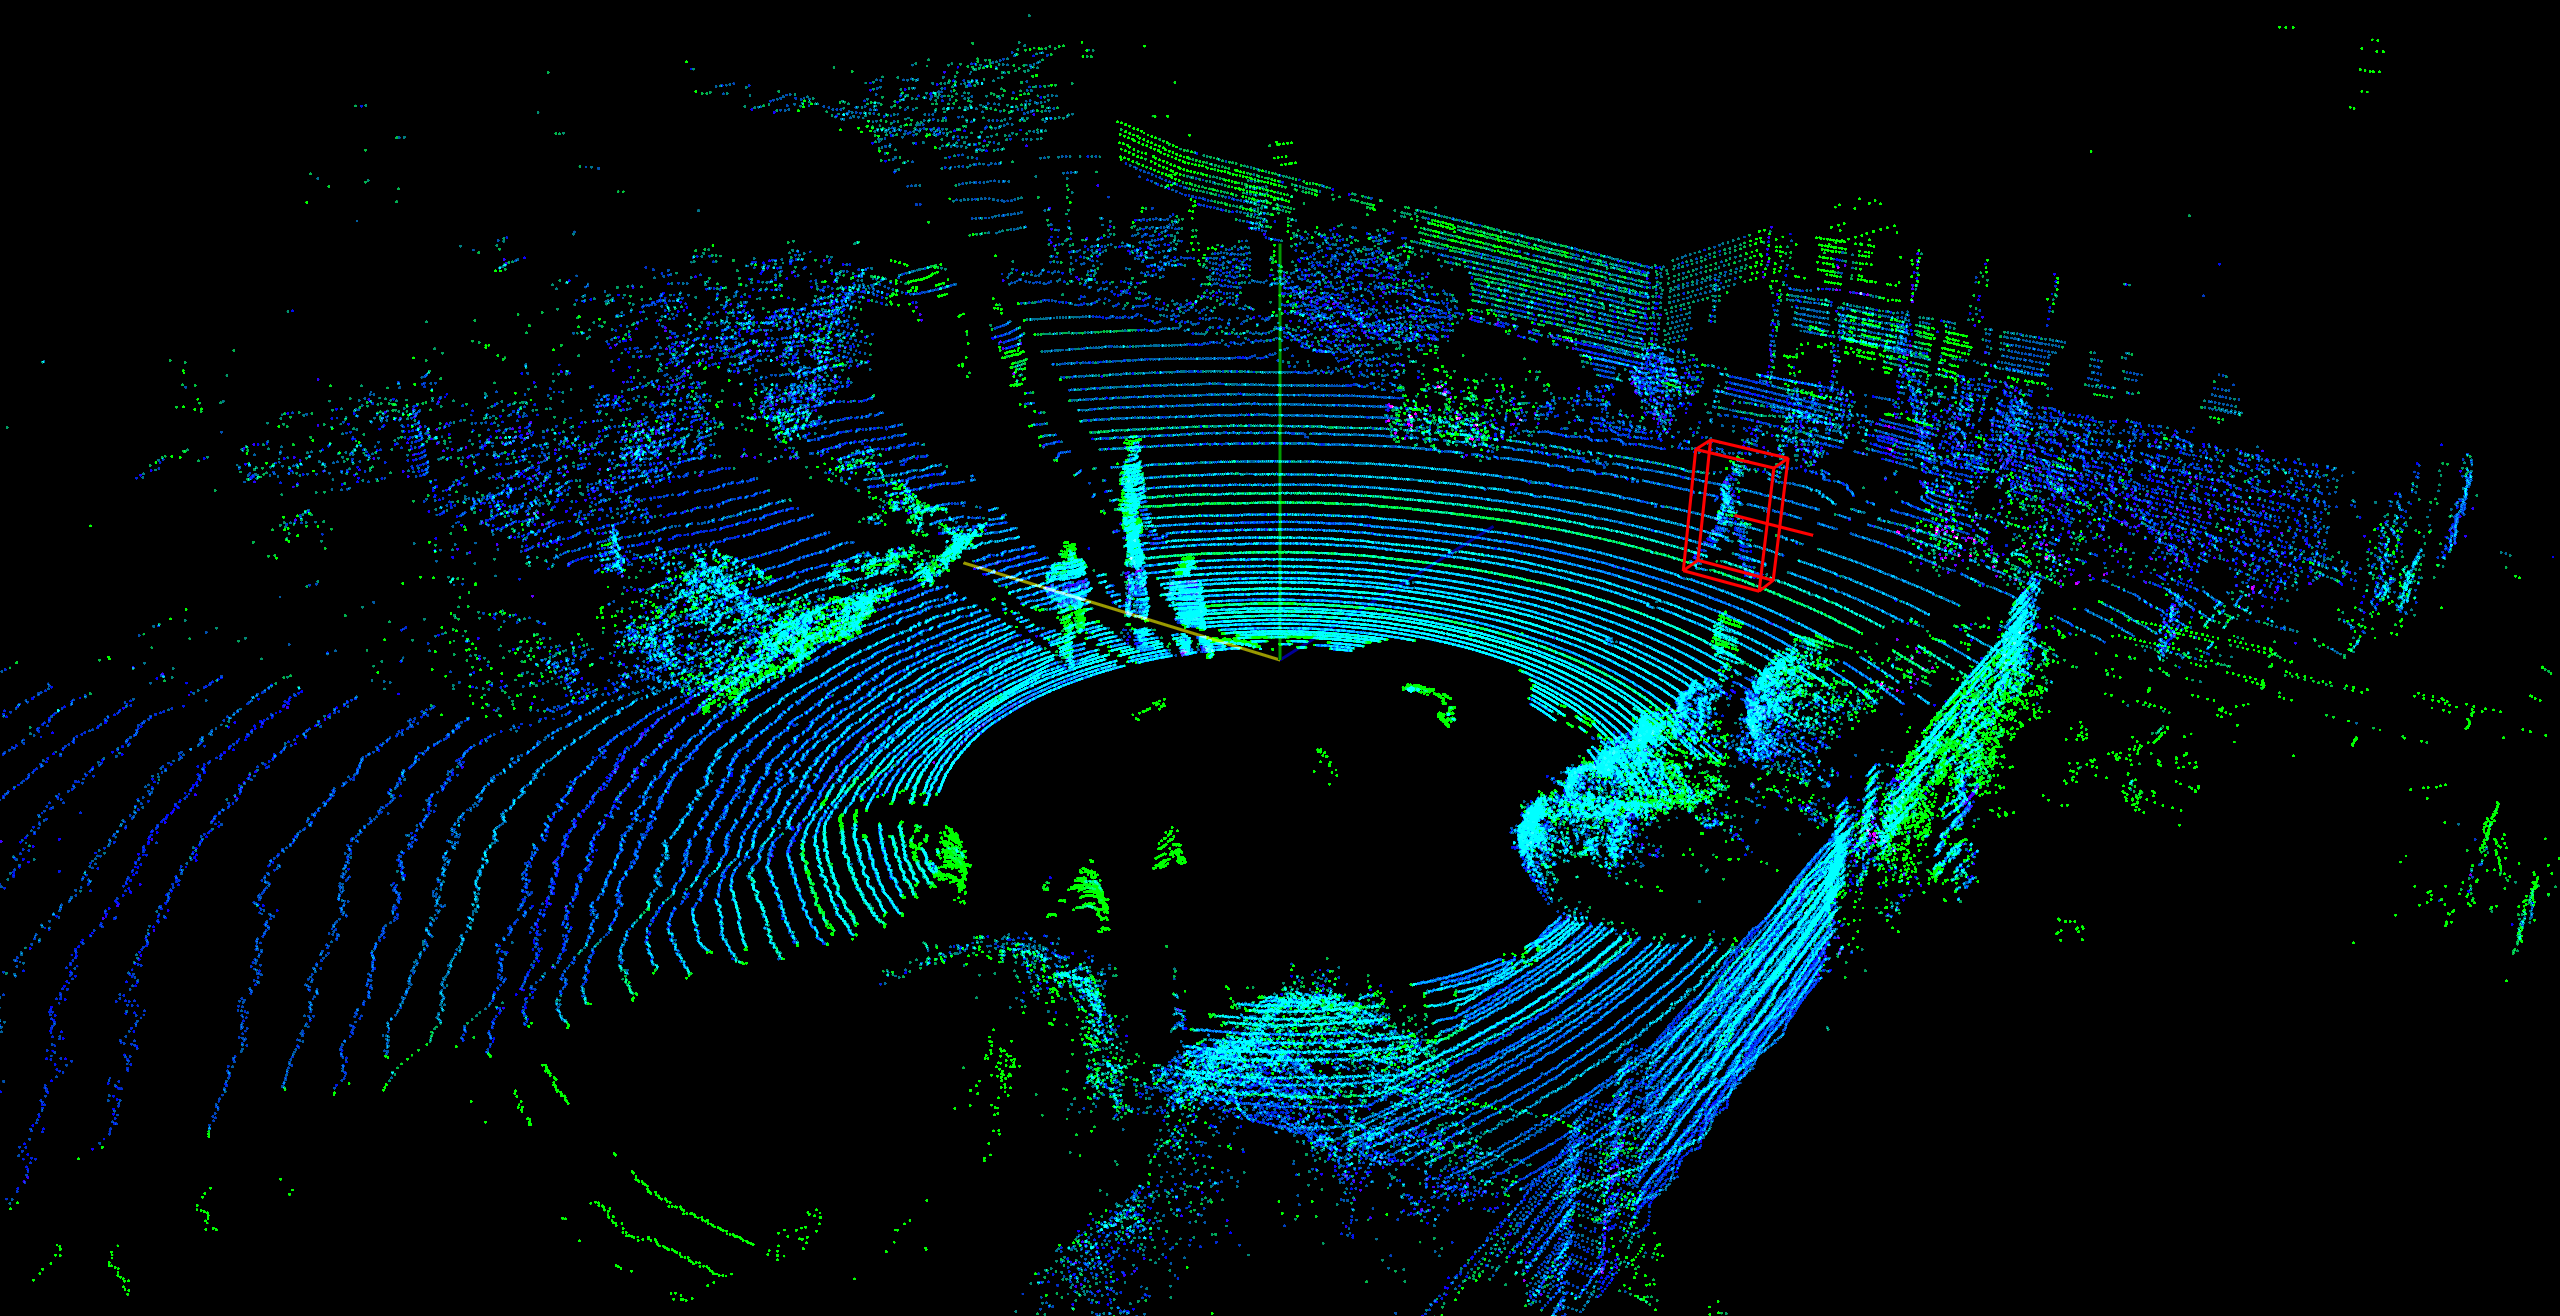 3D Point Cloud and 3D Bbox visualization